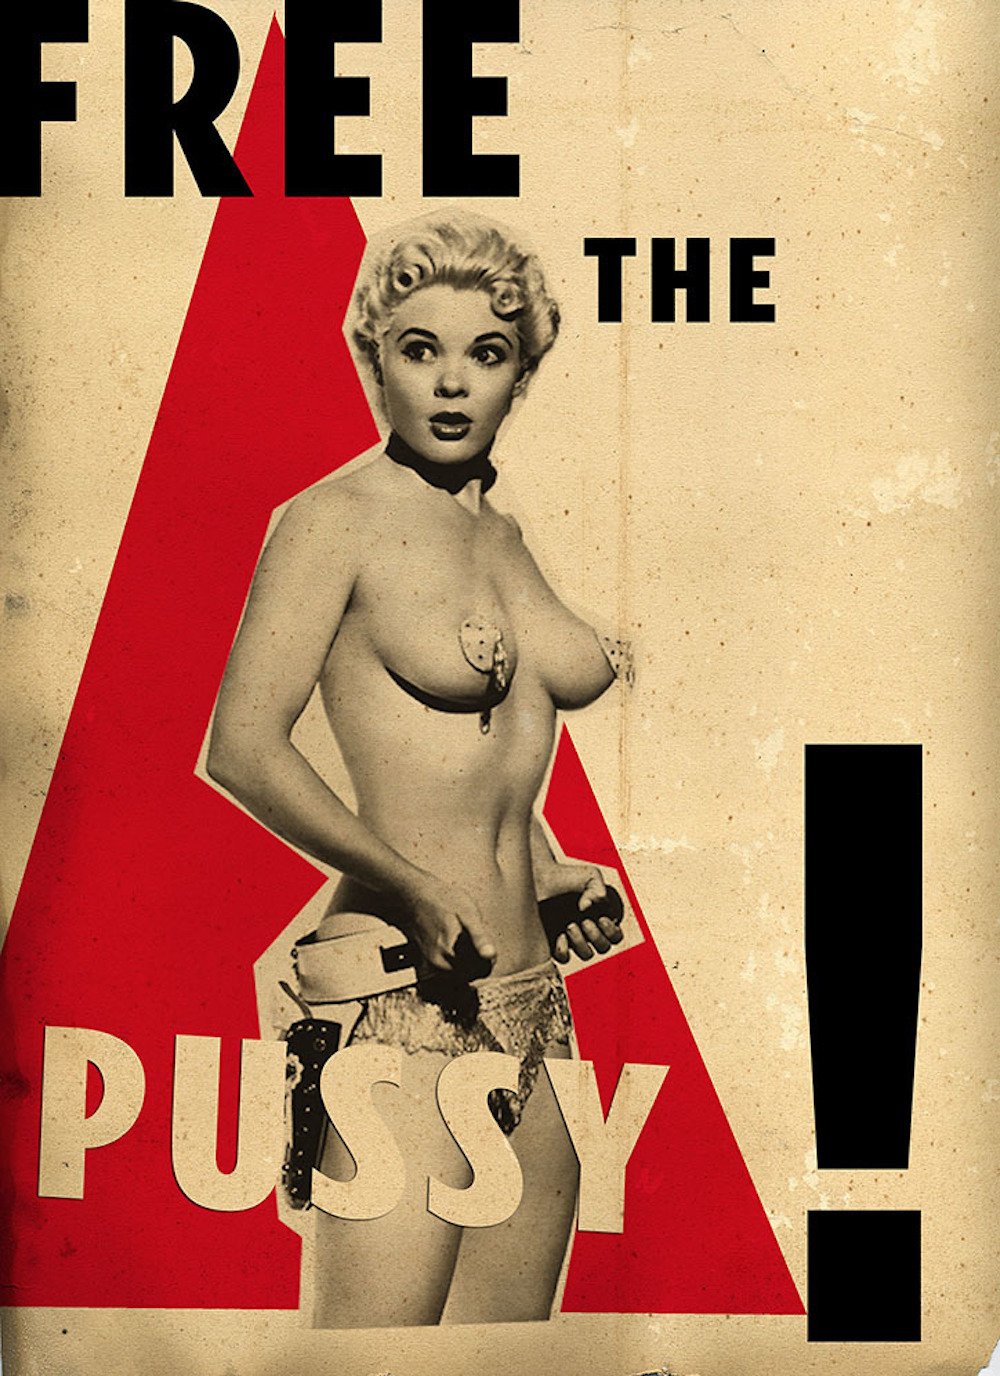 Image: Free the Pussy by Billy Chyldish 